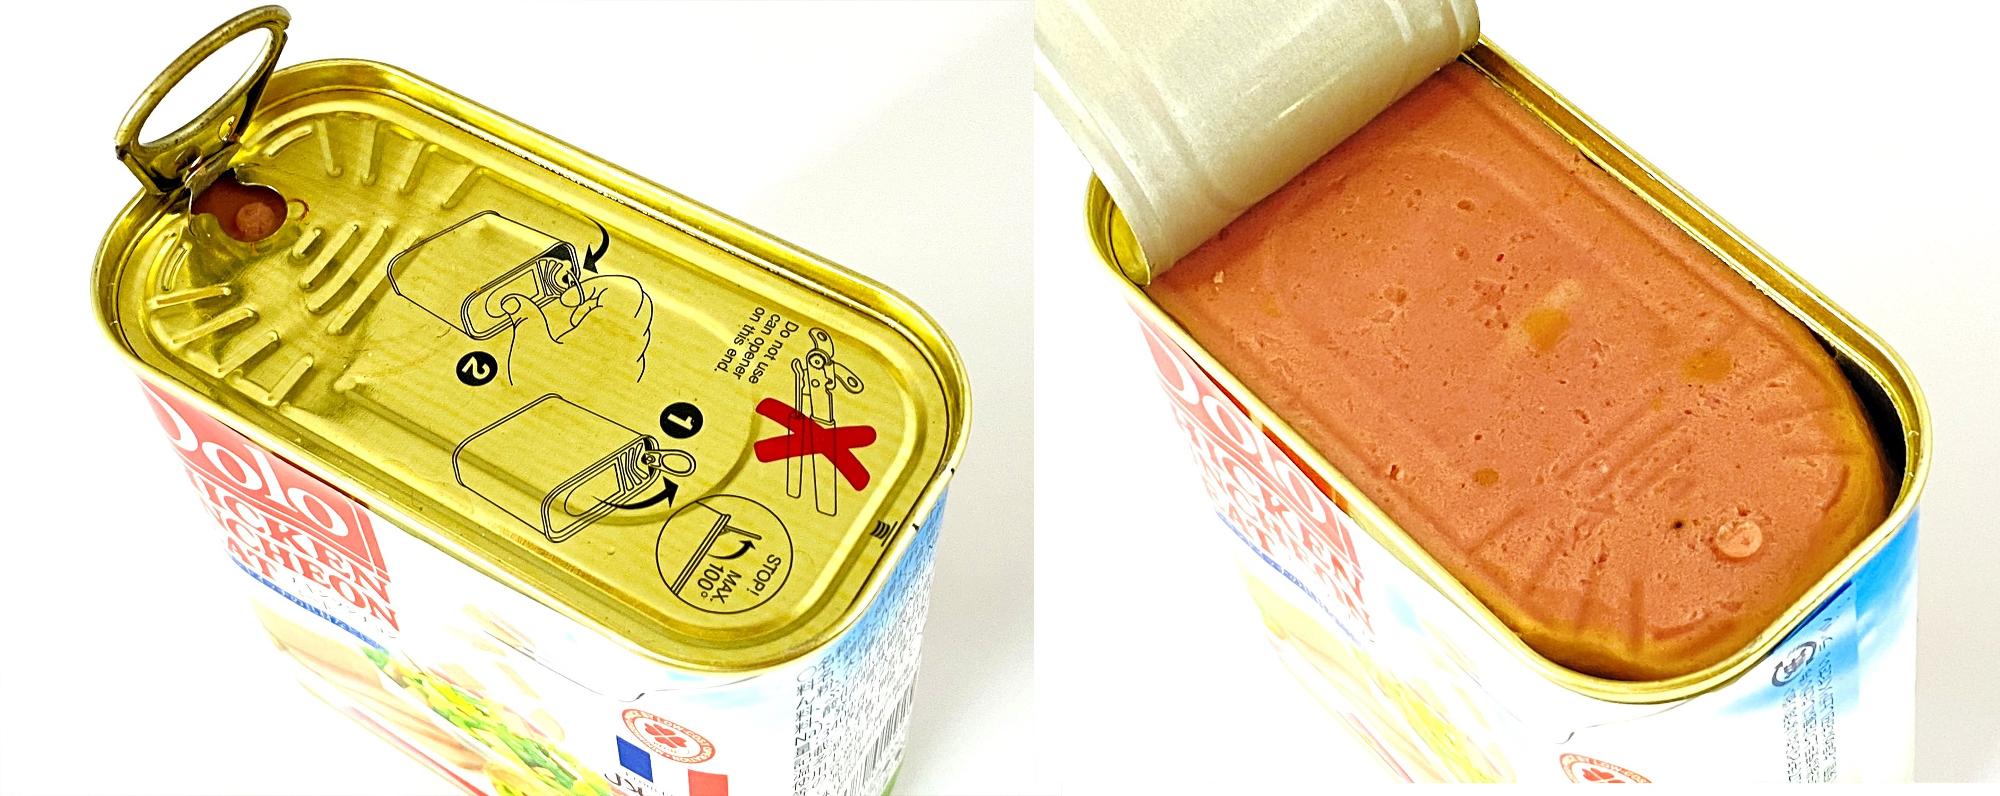 Do not use can opener on this end. 缶切りを使用しないでください。